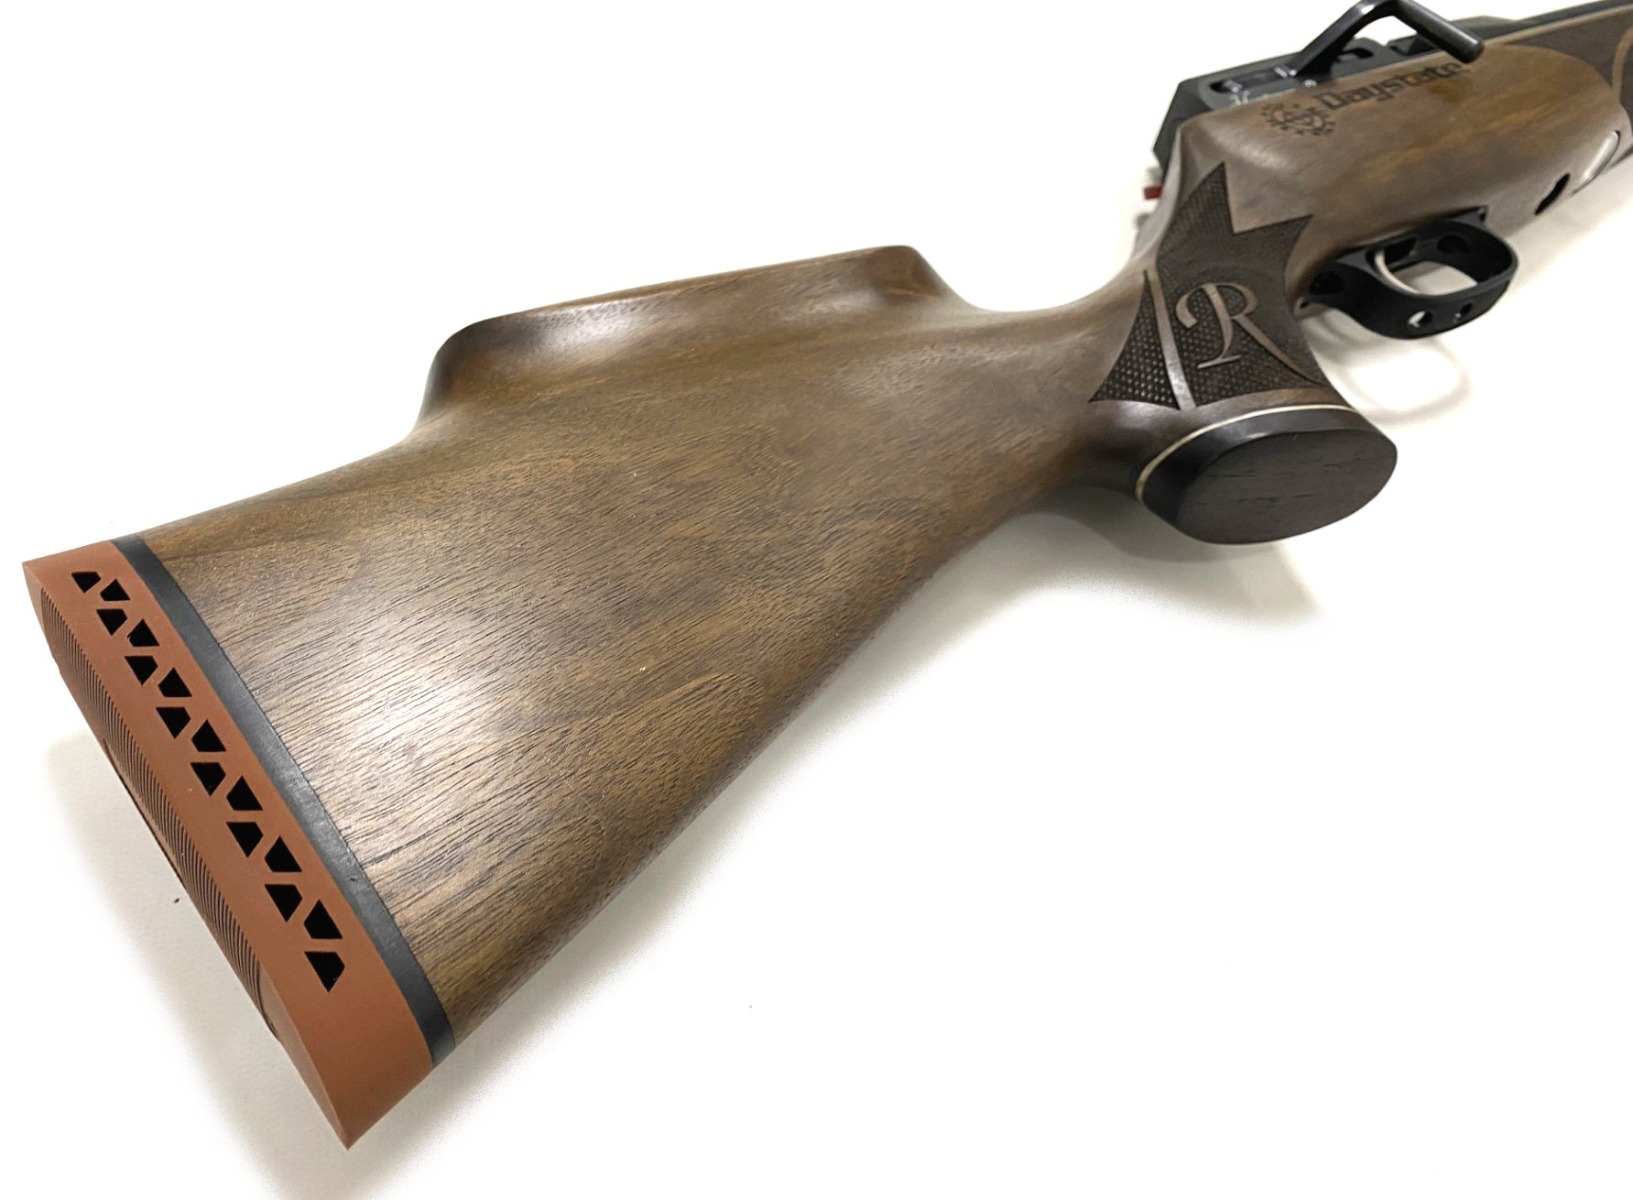 Daystate Huntsman Revere .22 Pre-Charged Air Rifle - 230731/005 Image 4